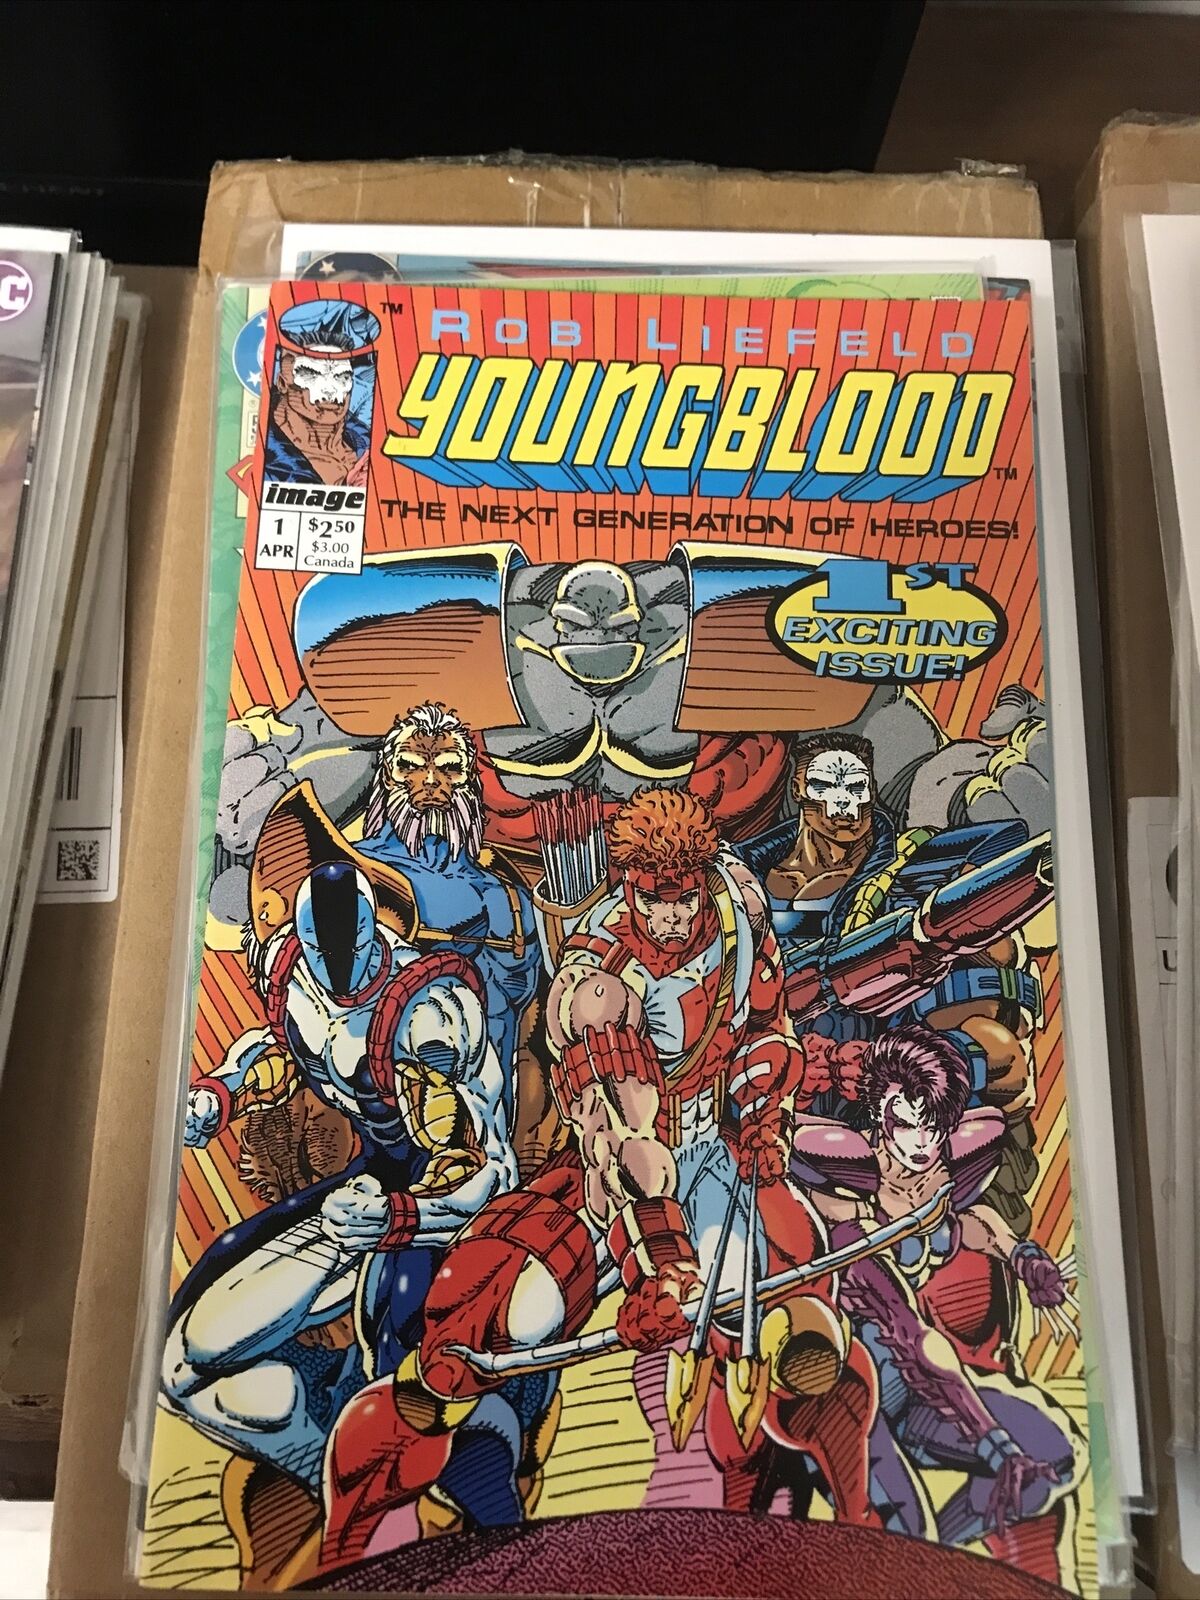 Youngblood #1 1992 Image Rob Liefeld-Double Cover- I combine shipping